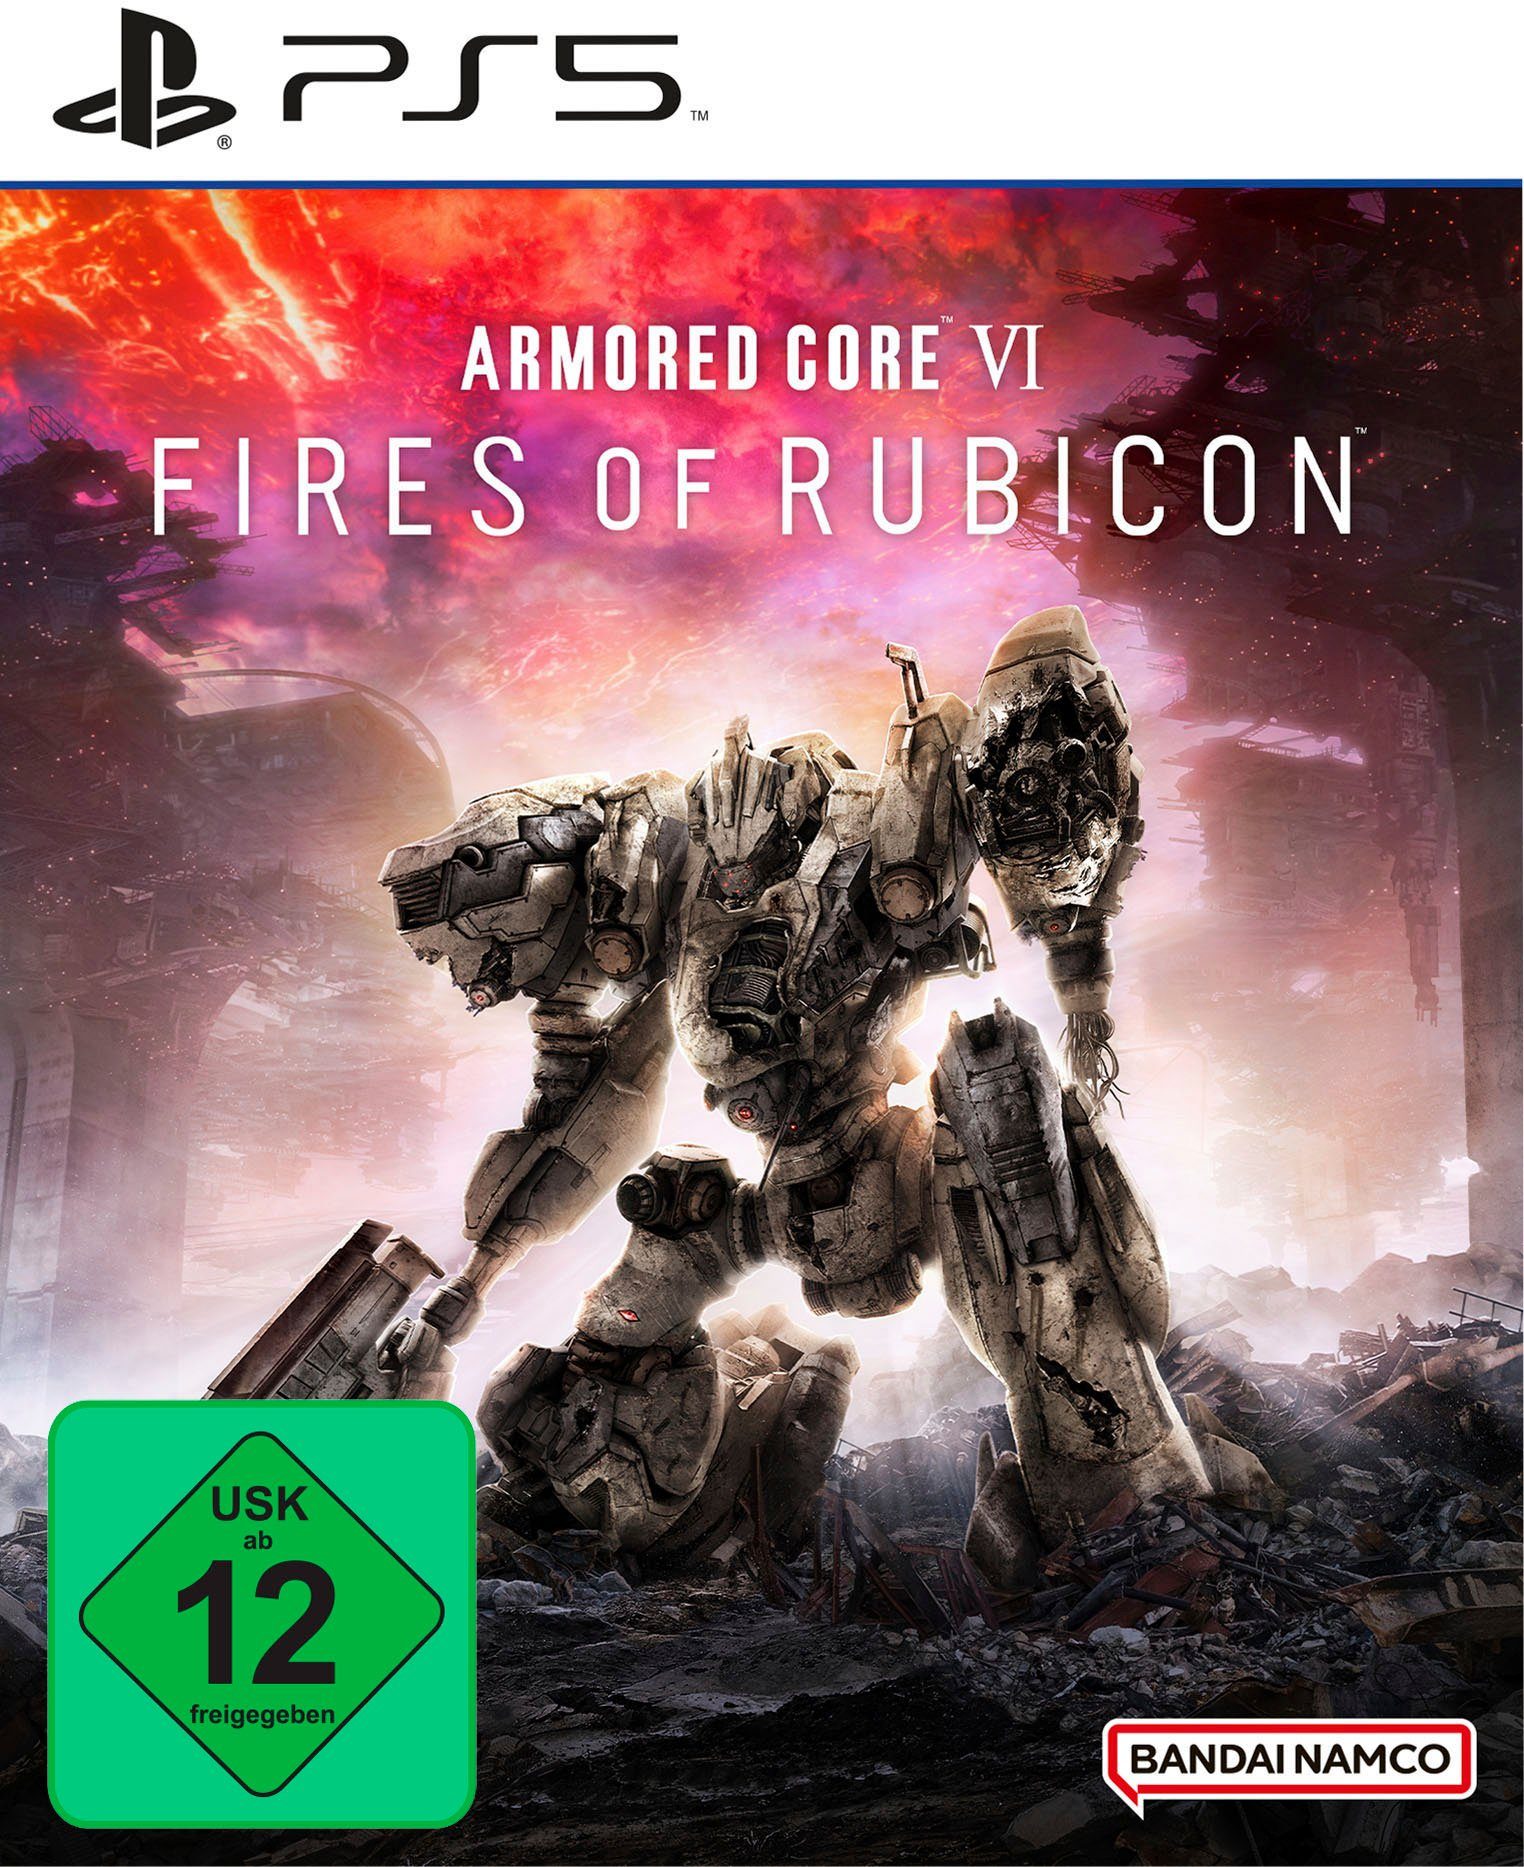 Launch VI Edition PlayStation Rubicon of Bandai Core Armored Fires 5